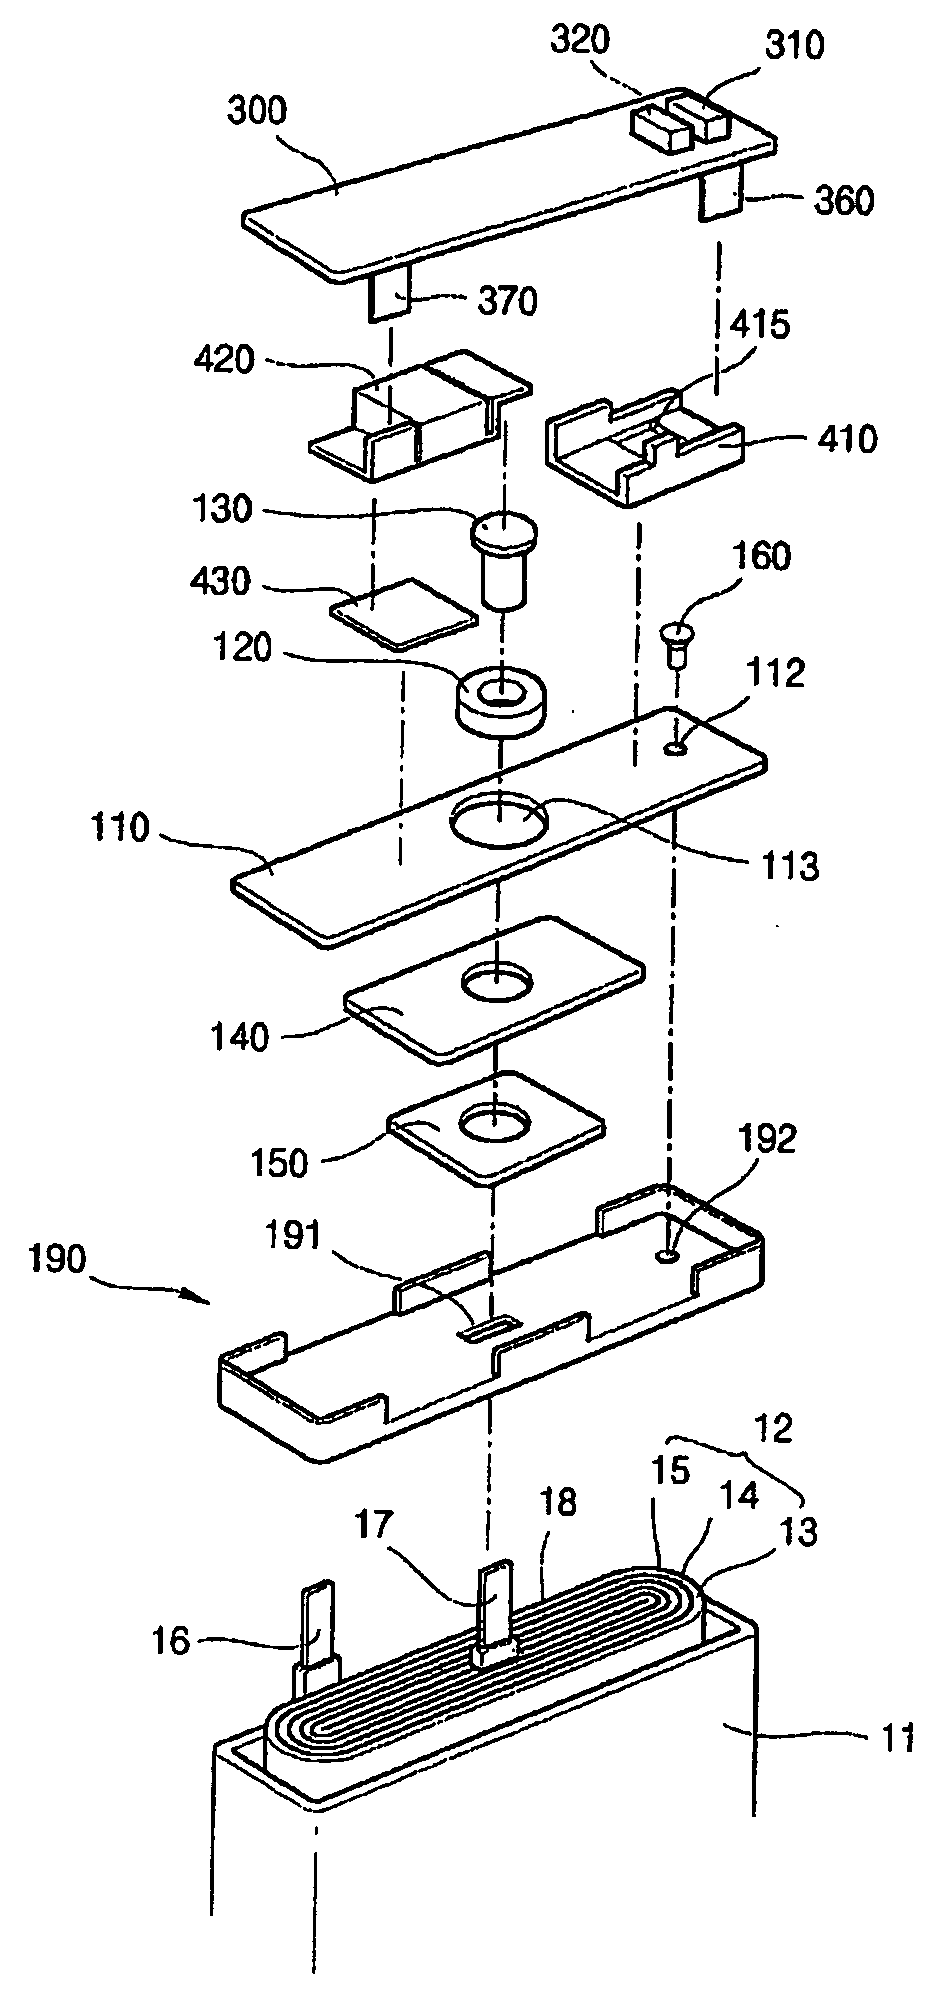 Secondary battery having lead plate attached thereto